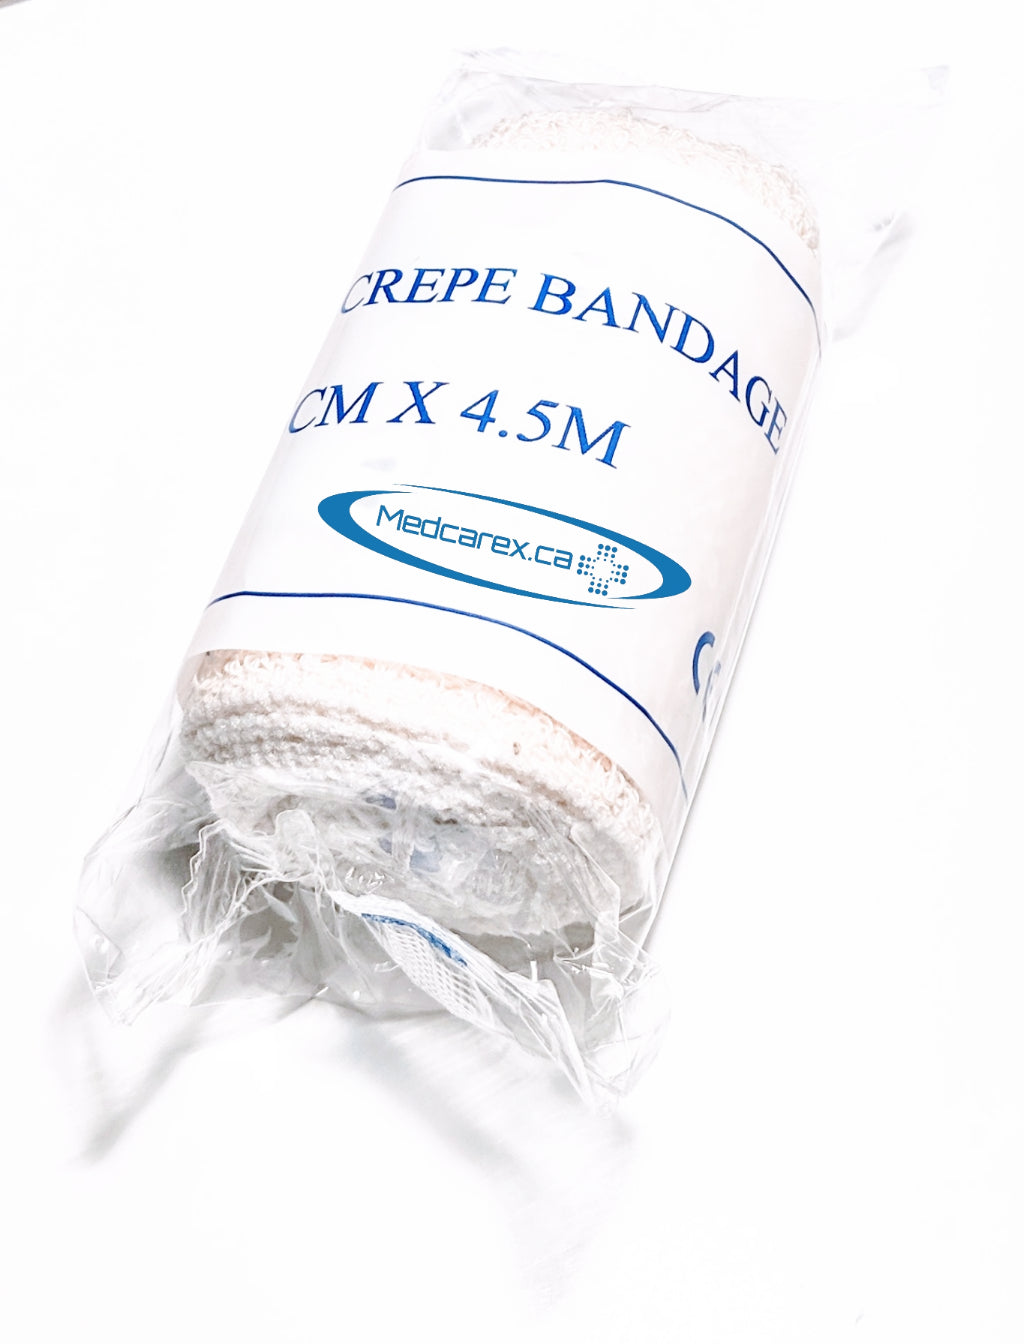 Crepe Bandage roll with metal clips, 3 inch x 5m, (7.6cm x 2.5m)